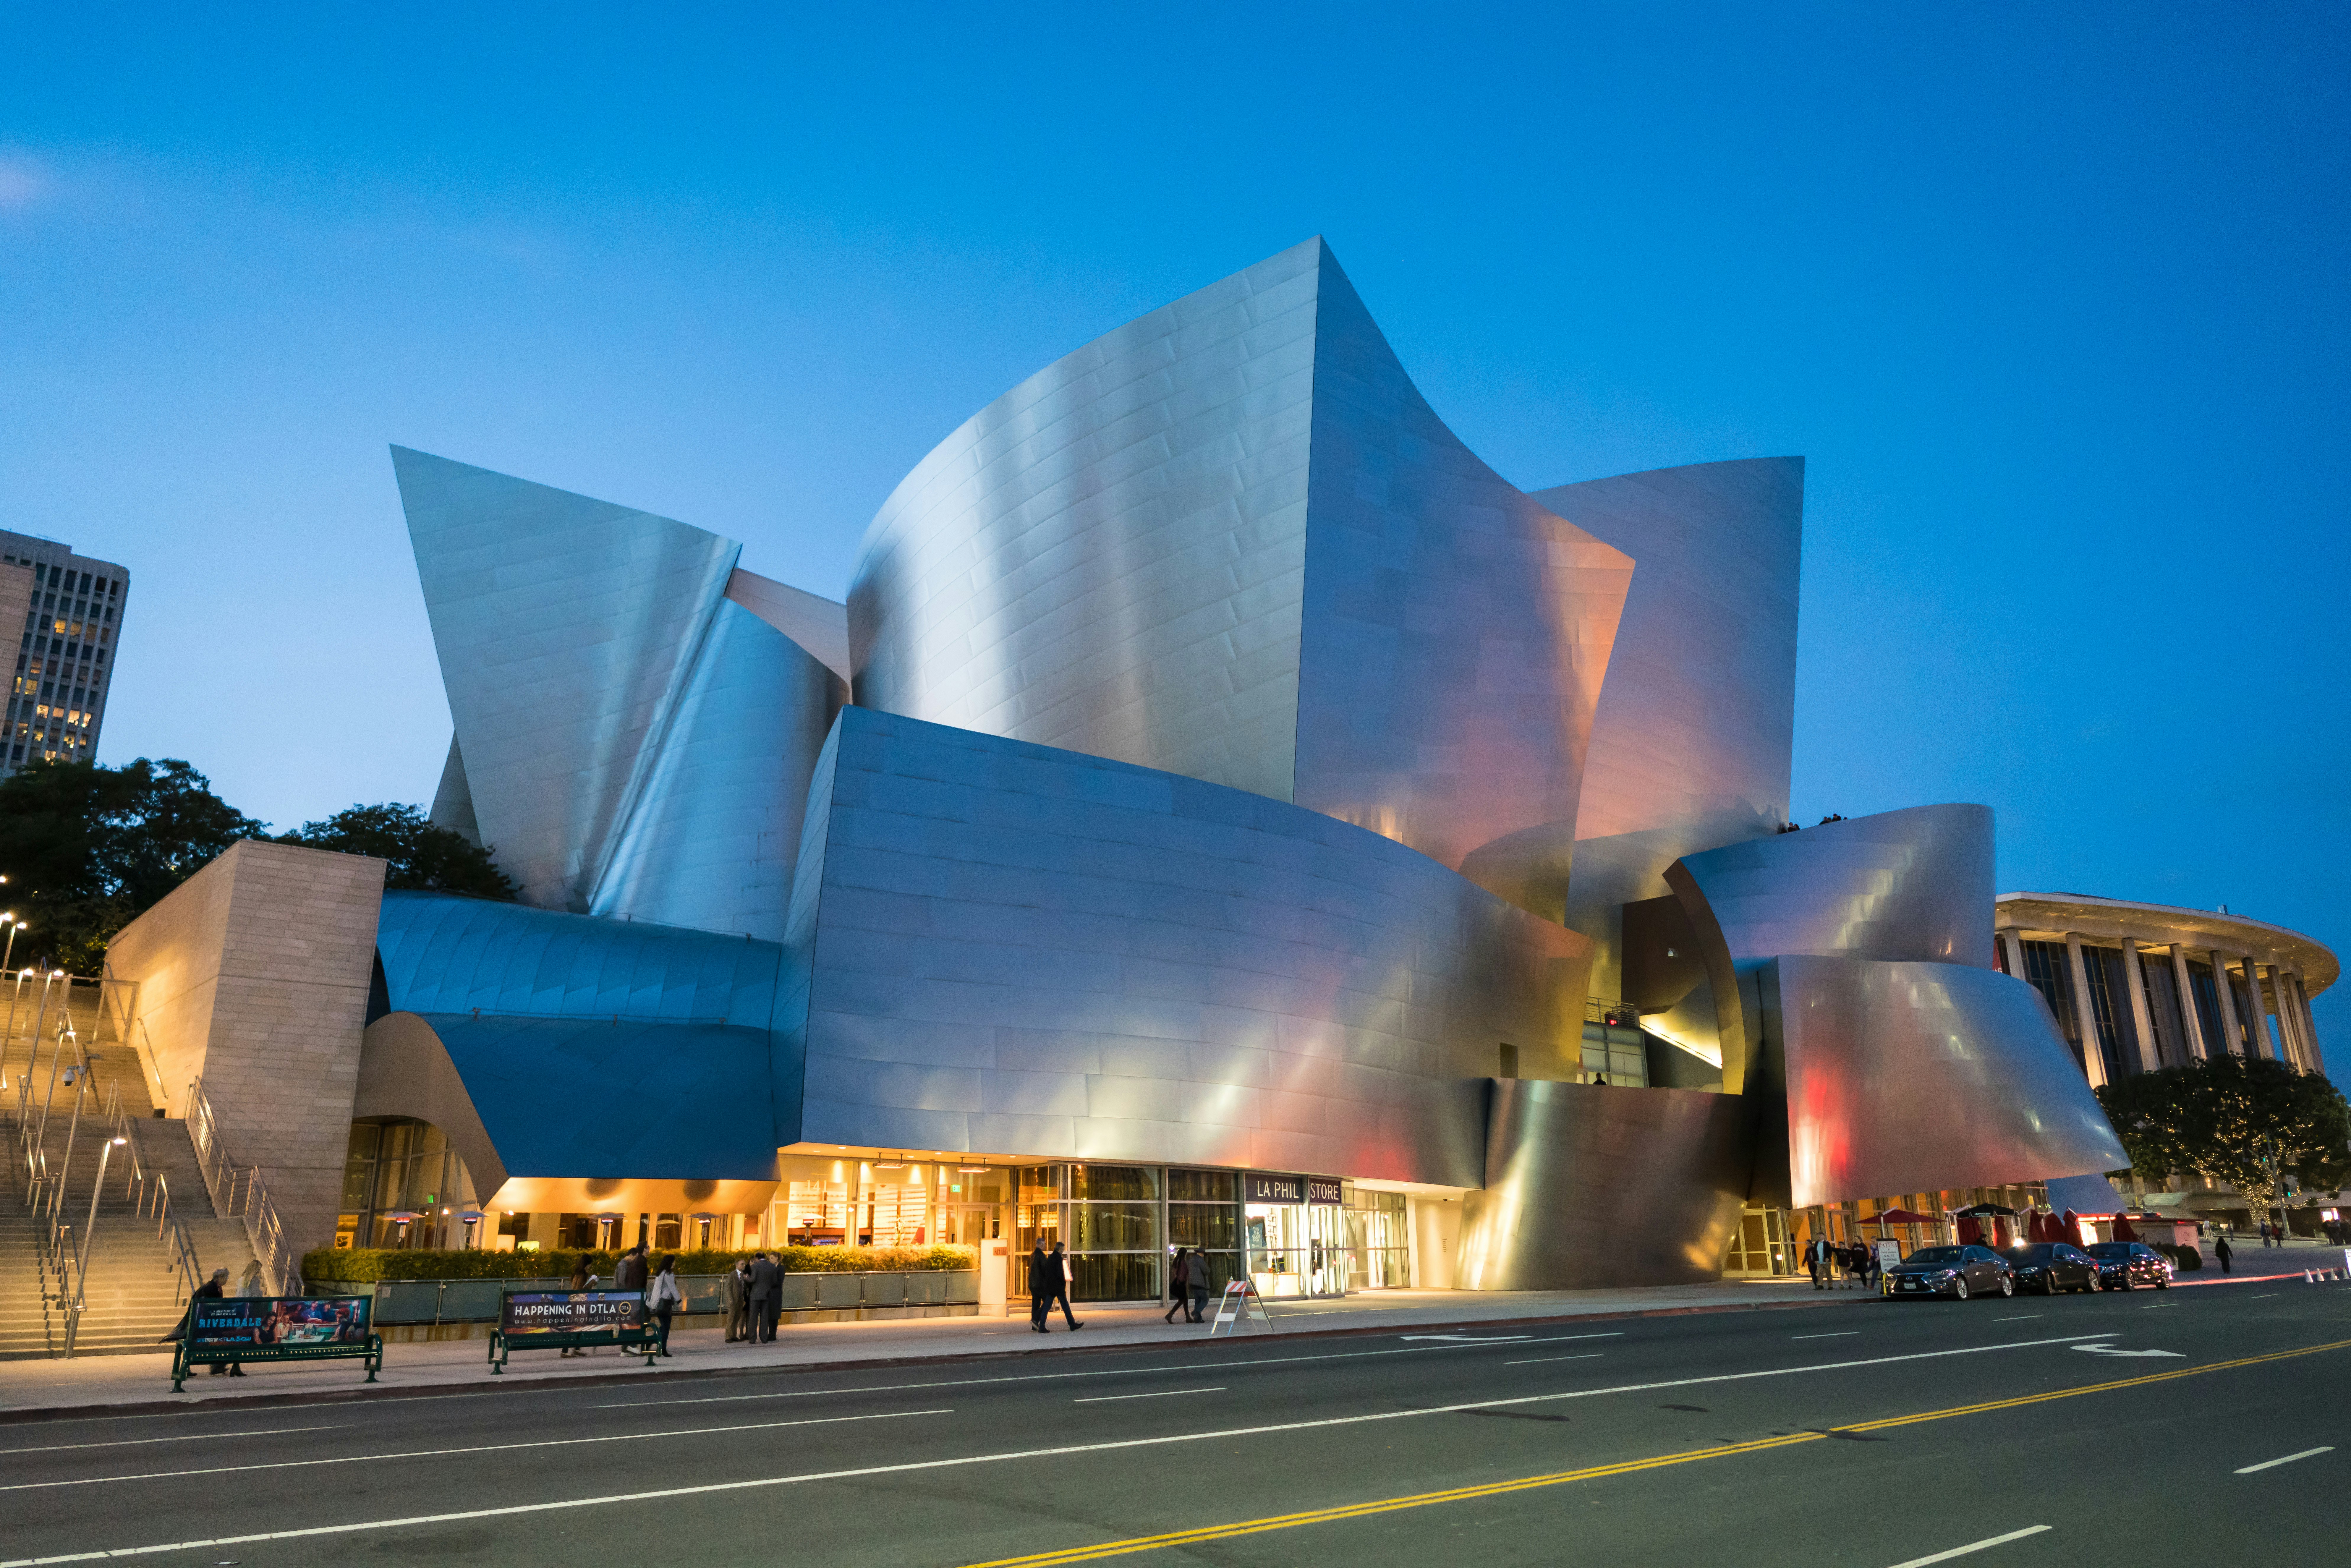 January 15, 2017 - Los Angeles, USA: Exterior view of Walt Disney Concert Hall and streets of downtown Los Angeles, building designed by Frank Gehry; Shutterstock ID 1353512546; your: Tasmin Waby; gl: 65050; netsuite: online editorial; full: demand project